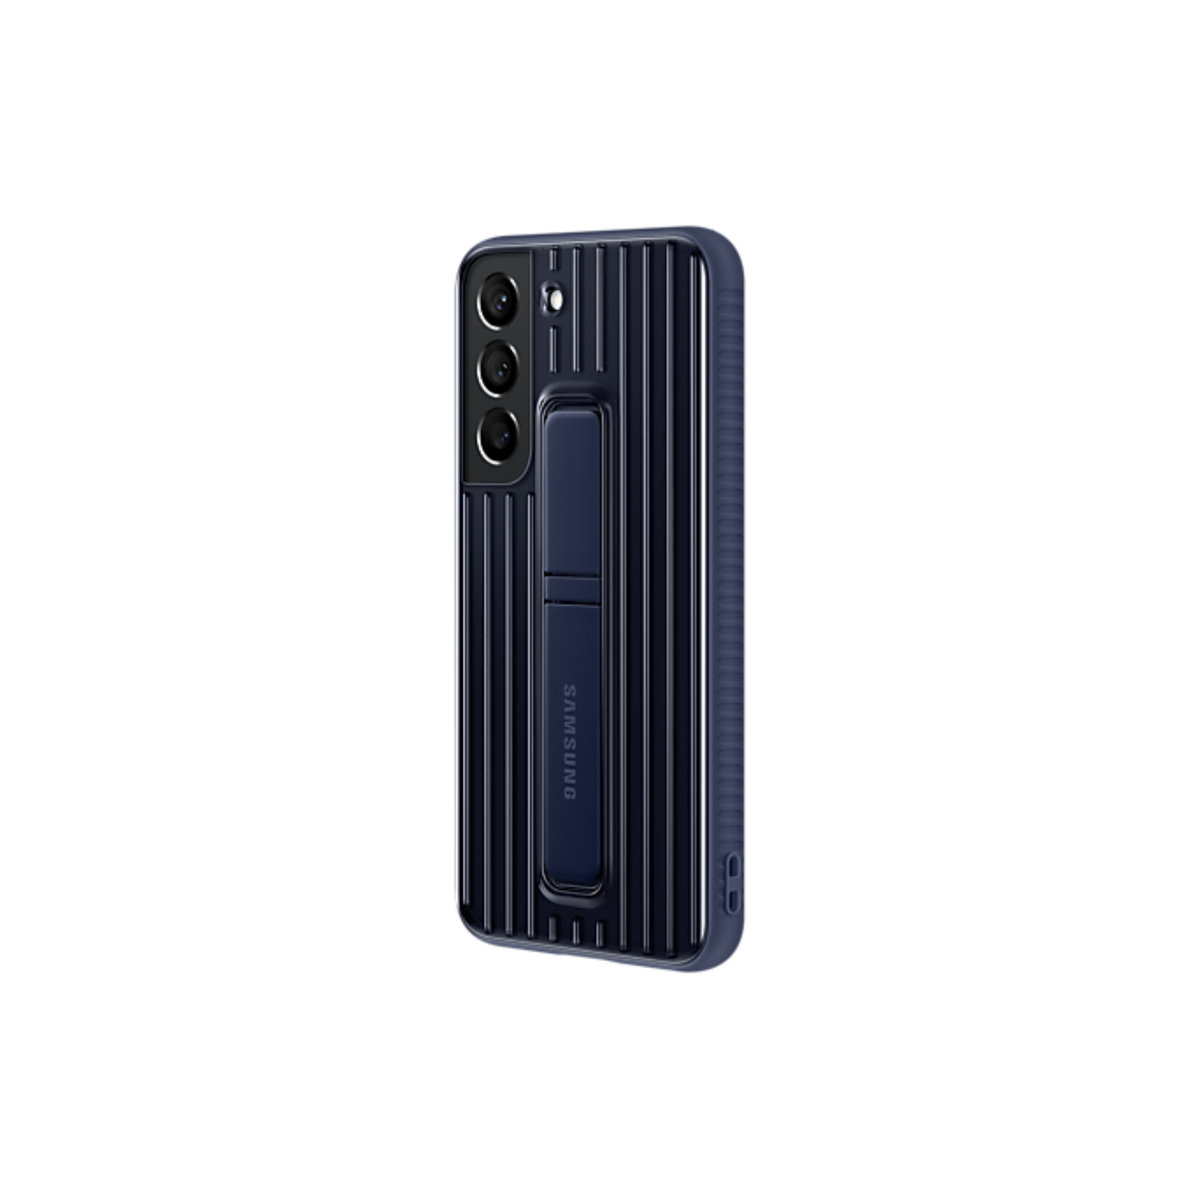 Samsung Protective Standing Cover for Galaxy S22, Navy, EF-RS901CNEGWW